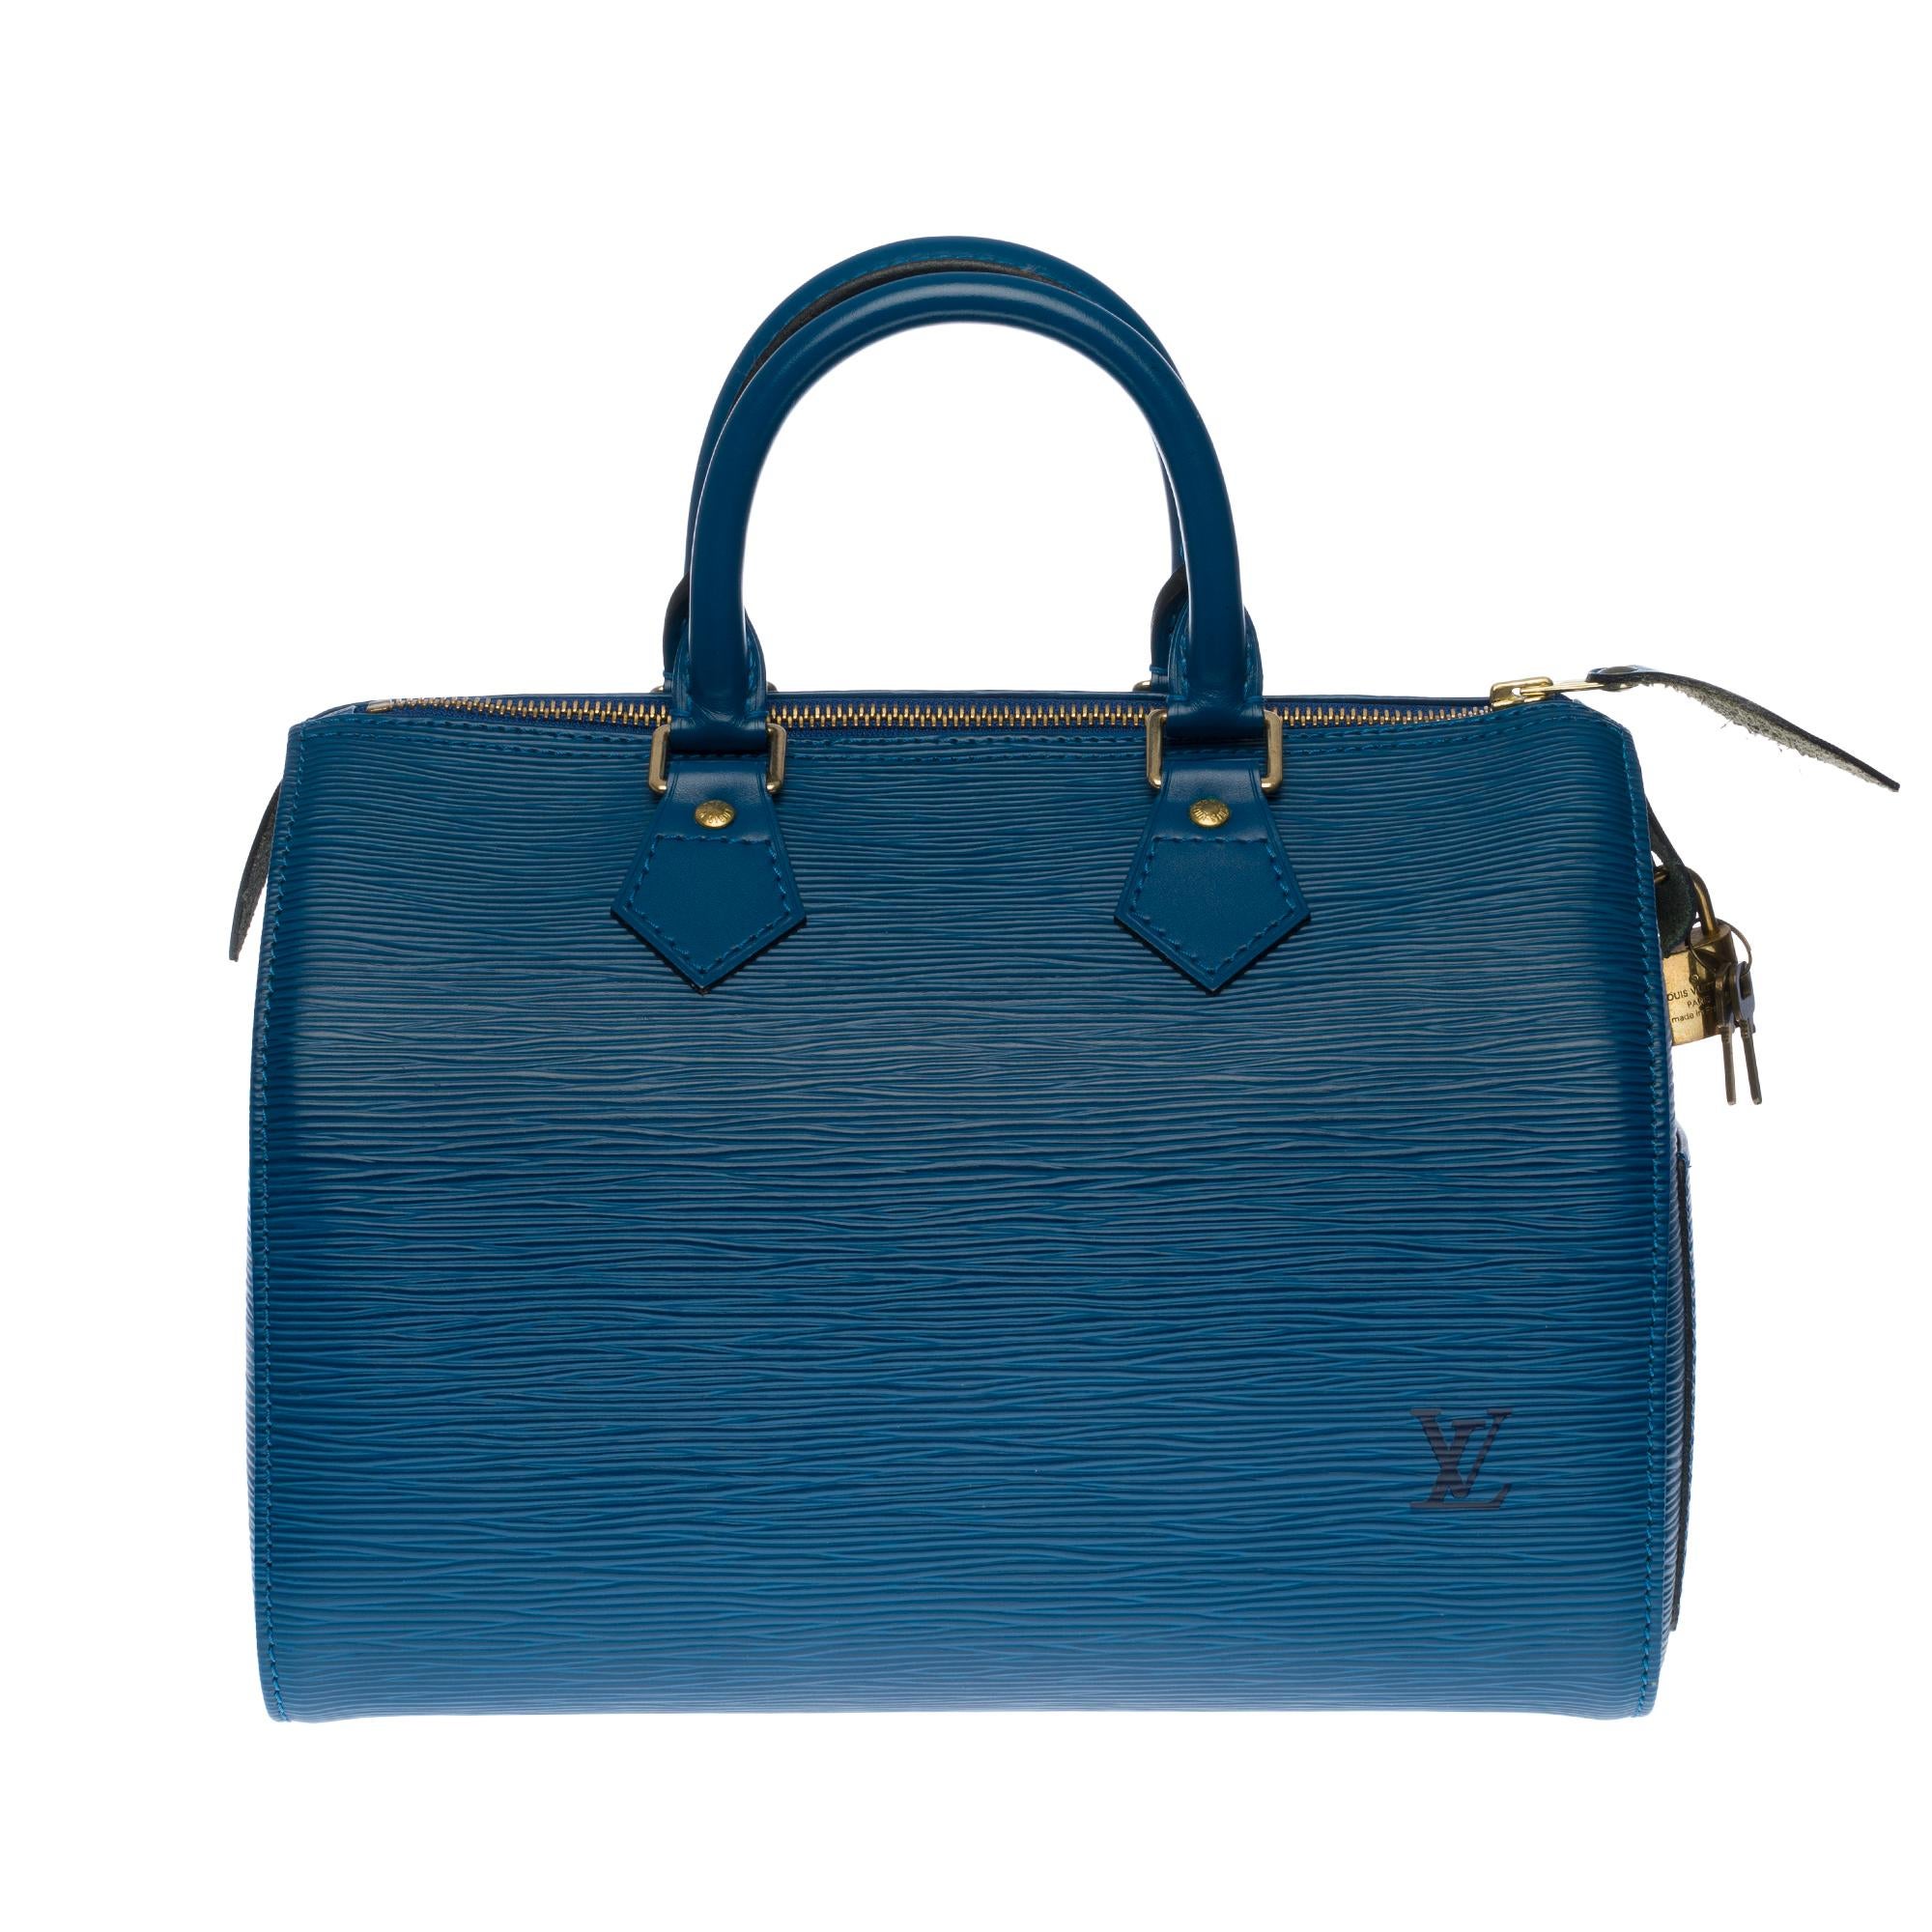 The iconic Louis Vuitton Speedy 30 handbag in blue epi leather, gold metal hardware, double handle in blue leather allowing a handheld.

Zip closure.
Interior in blue suede one patch pocket open.
Signature: 